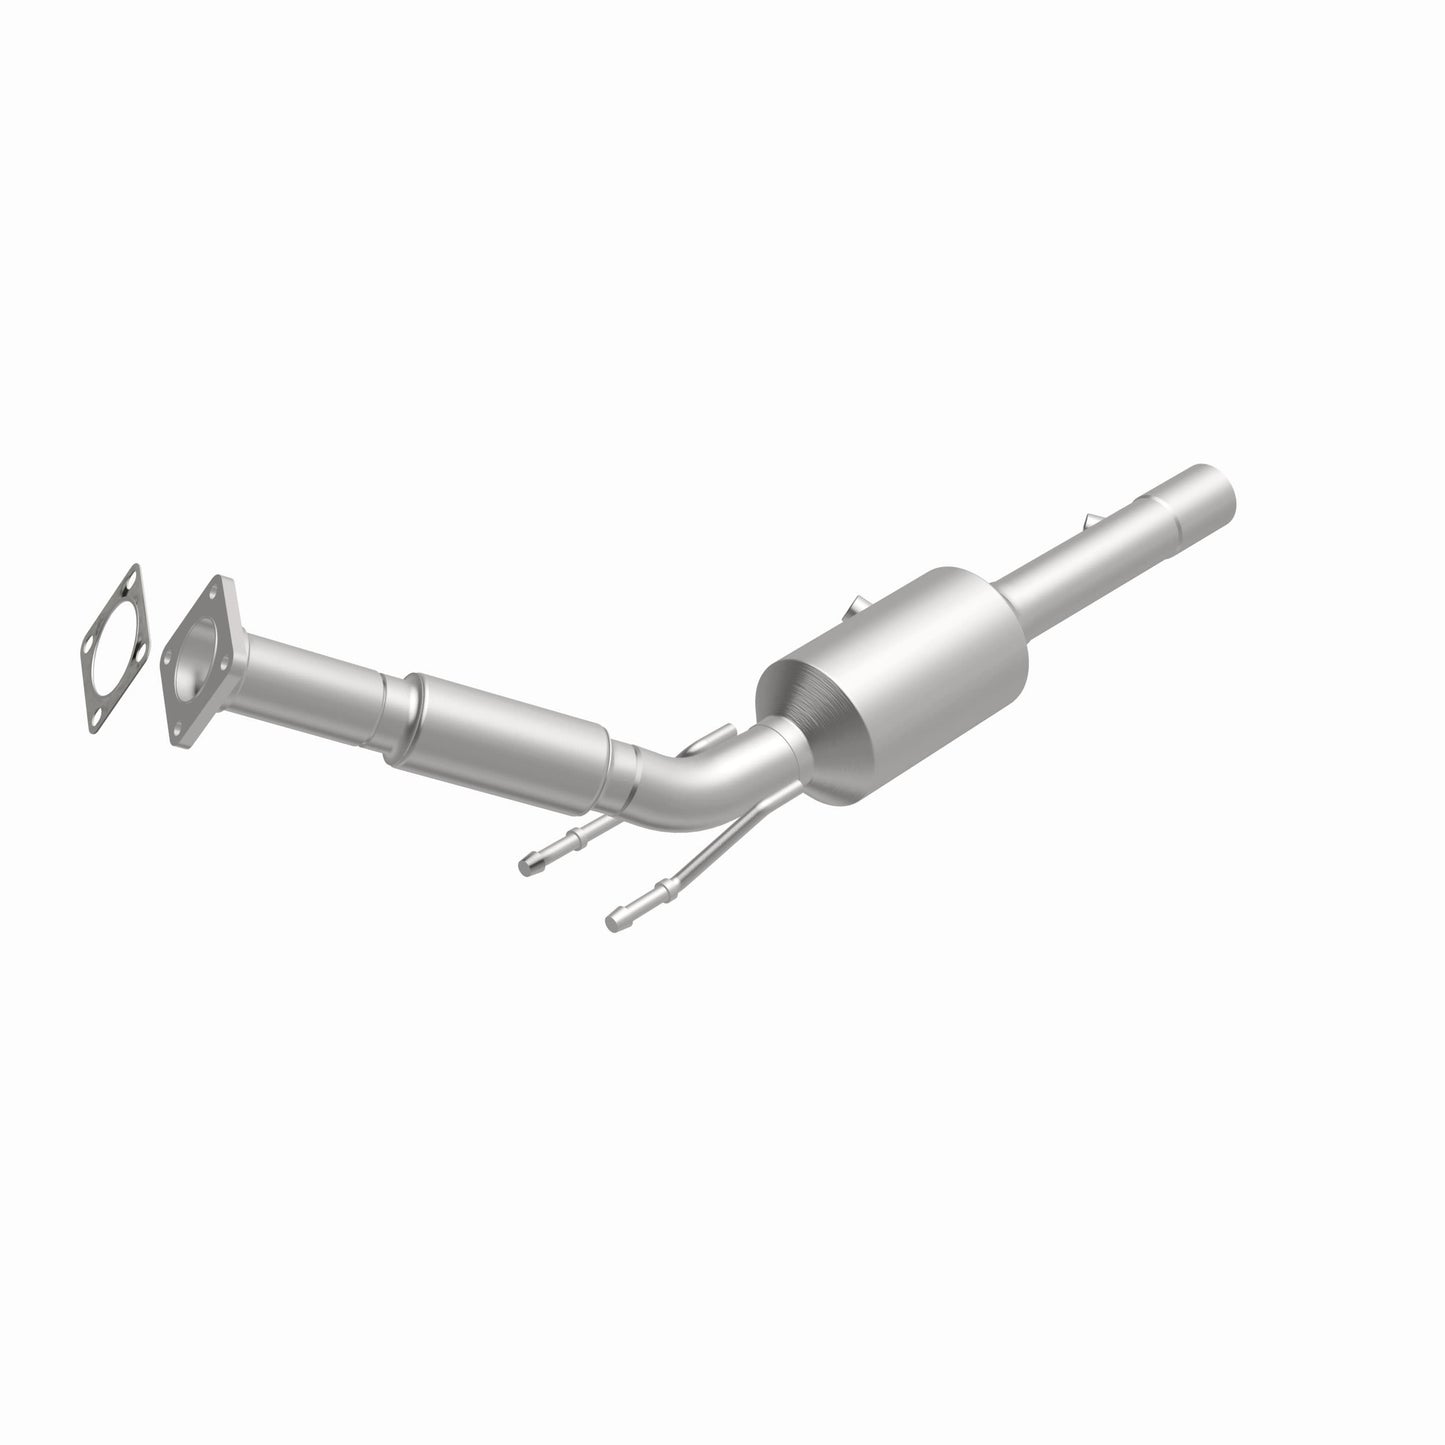 California Grade CARB Compliant Direct-Fit Catalytic Converter 5661990